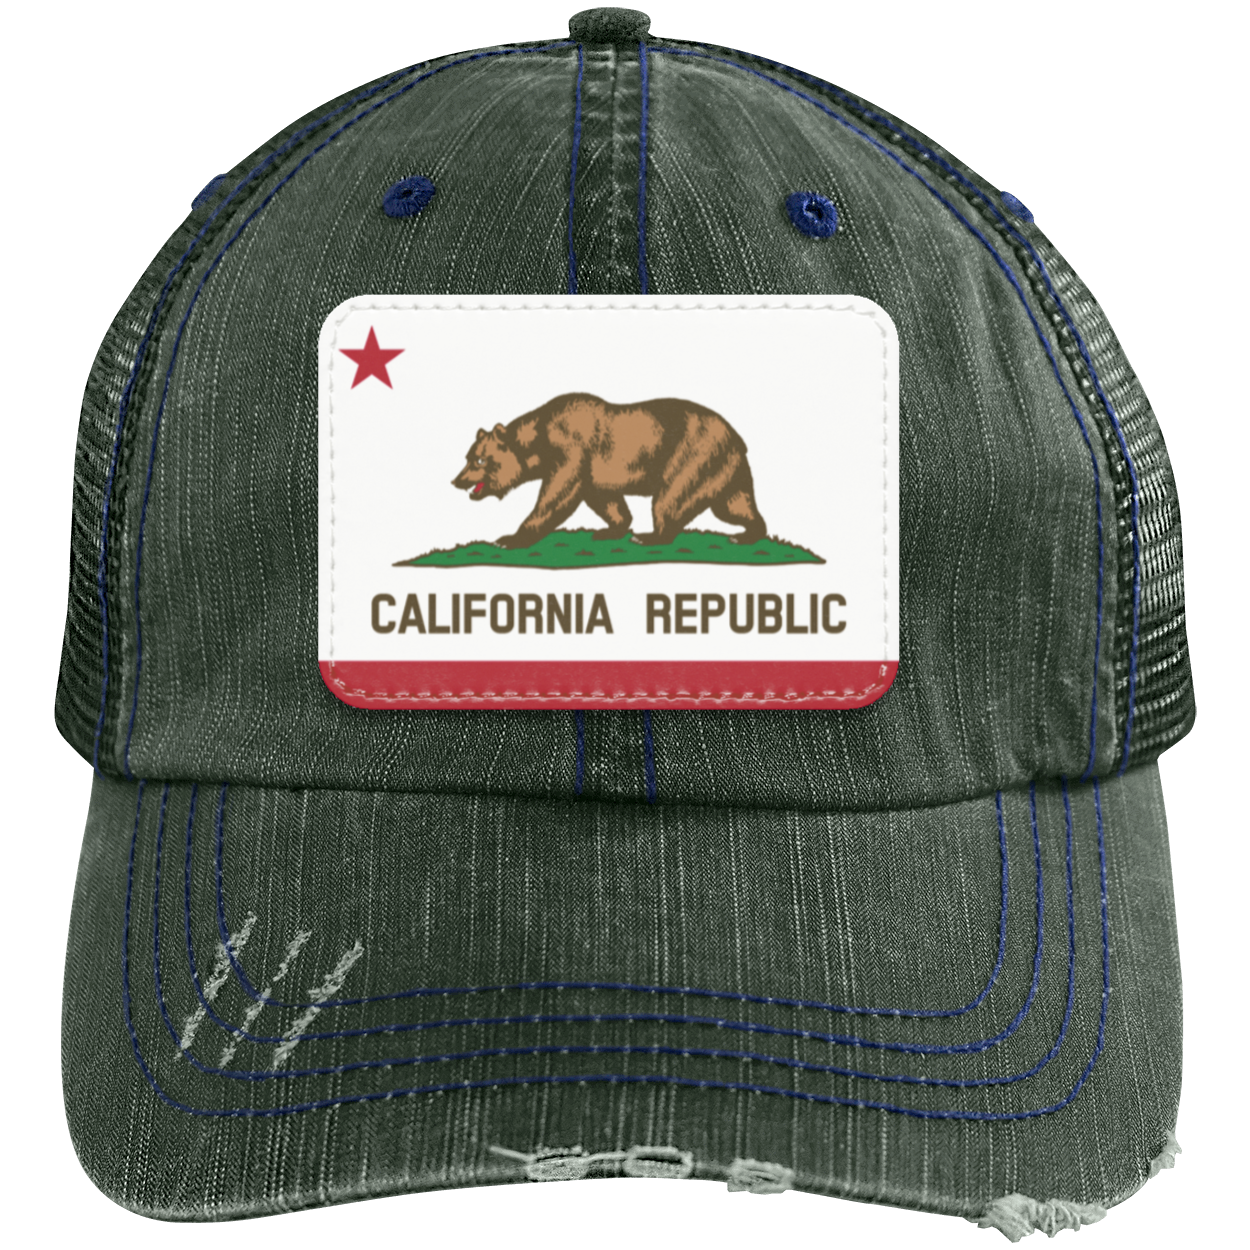 California State Flag - United States of America Distressed Unstructured Trucker Cap - Patch